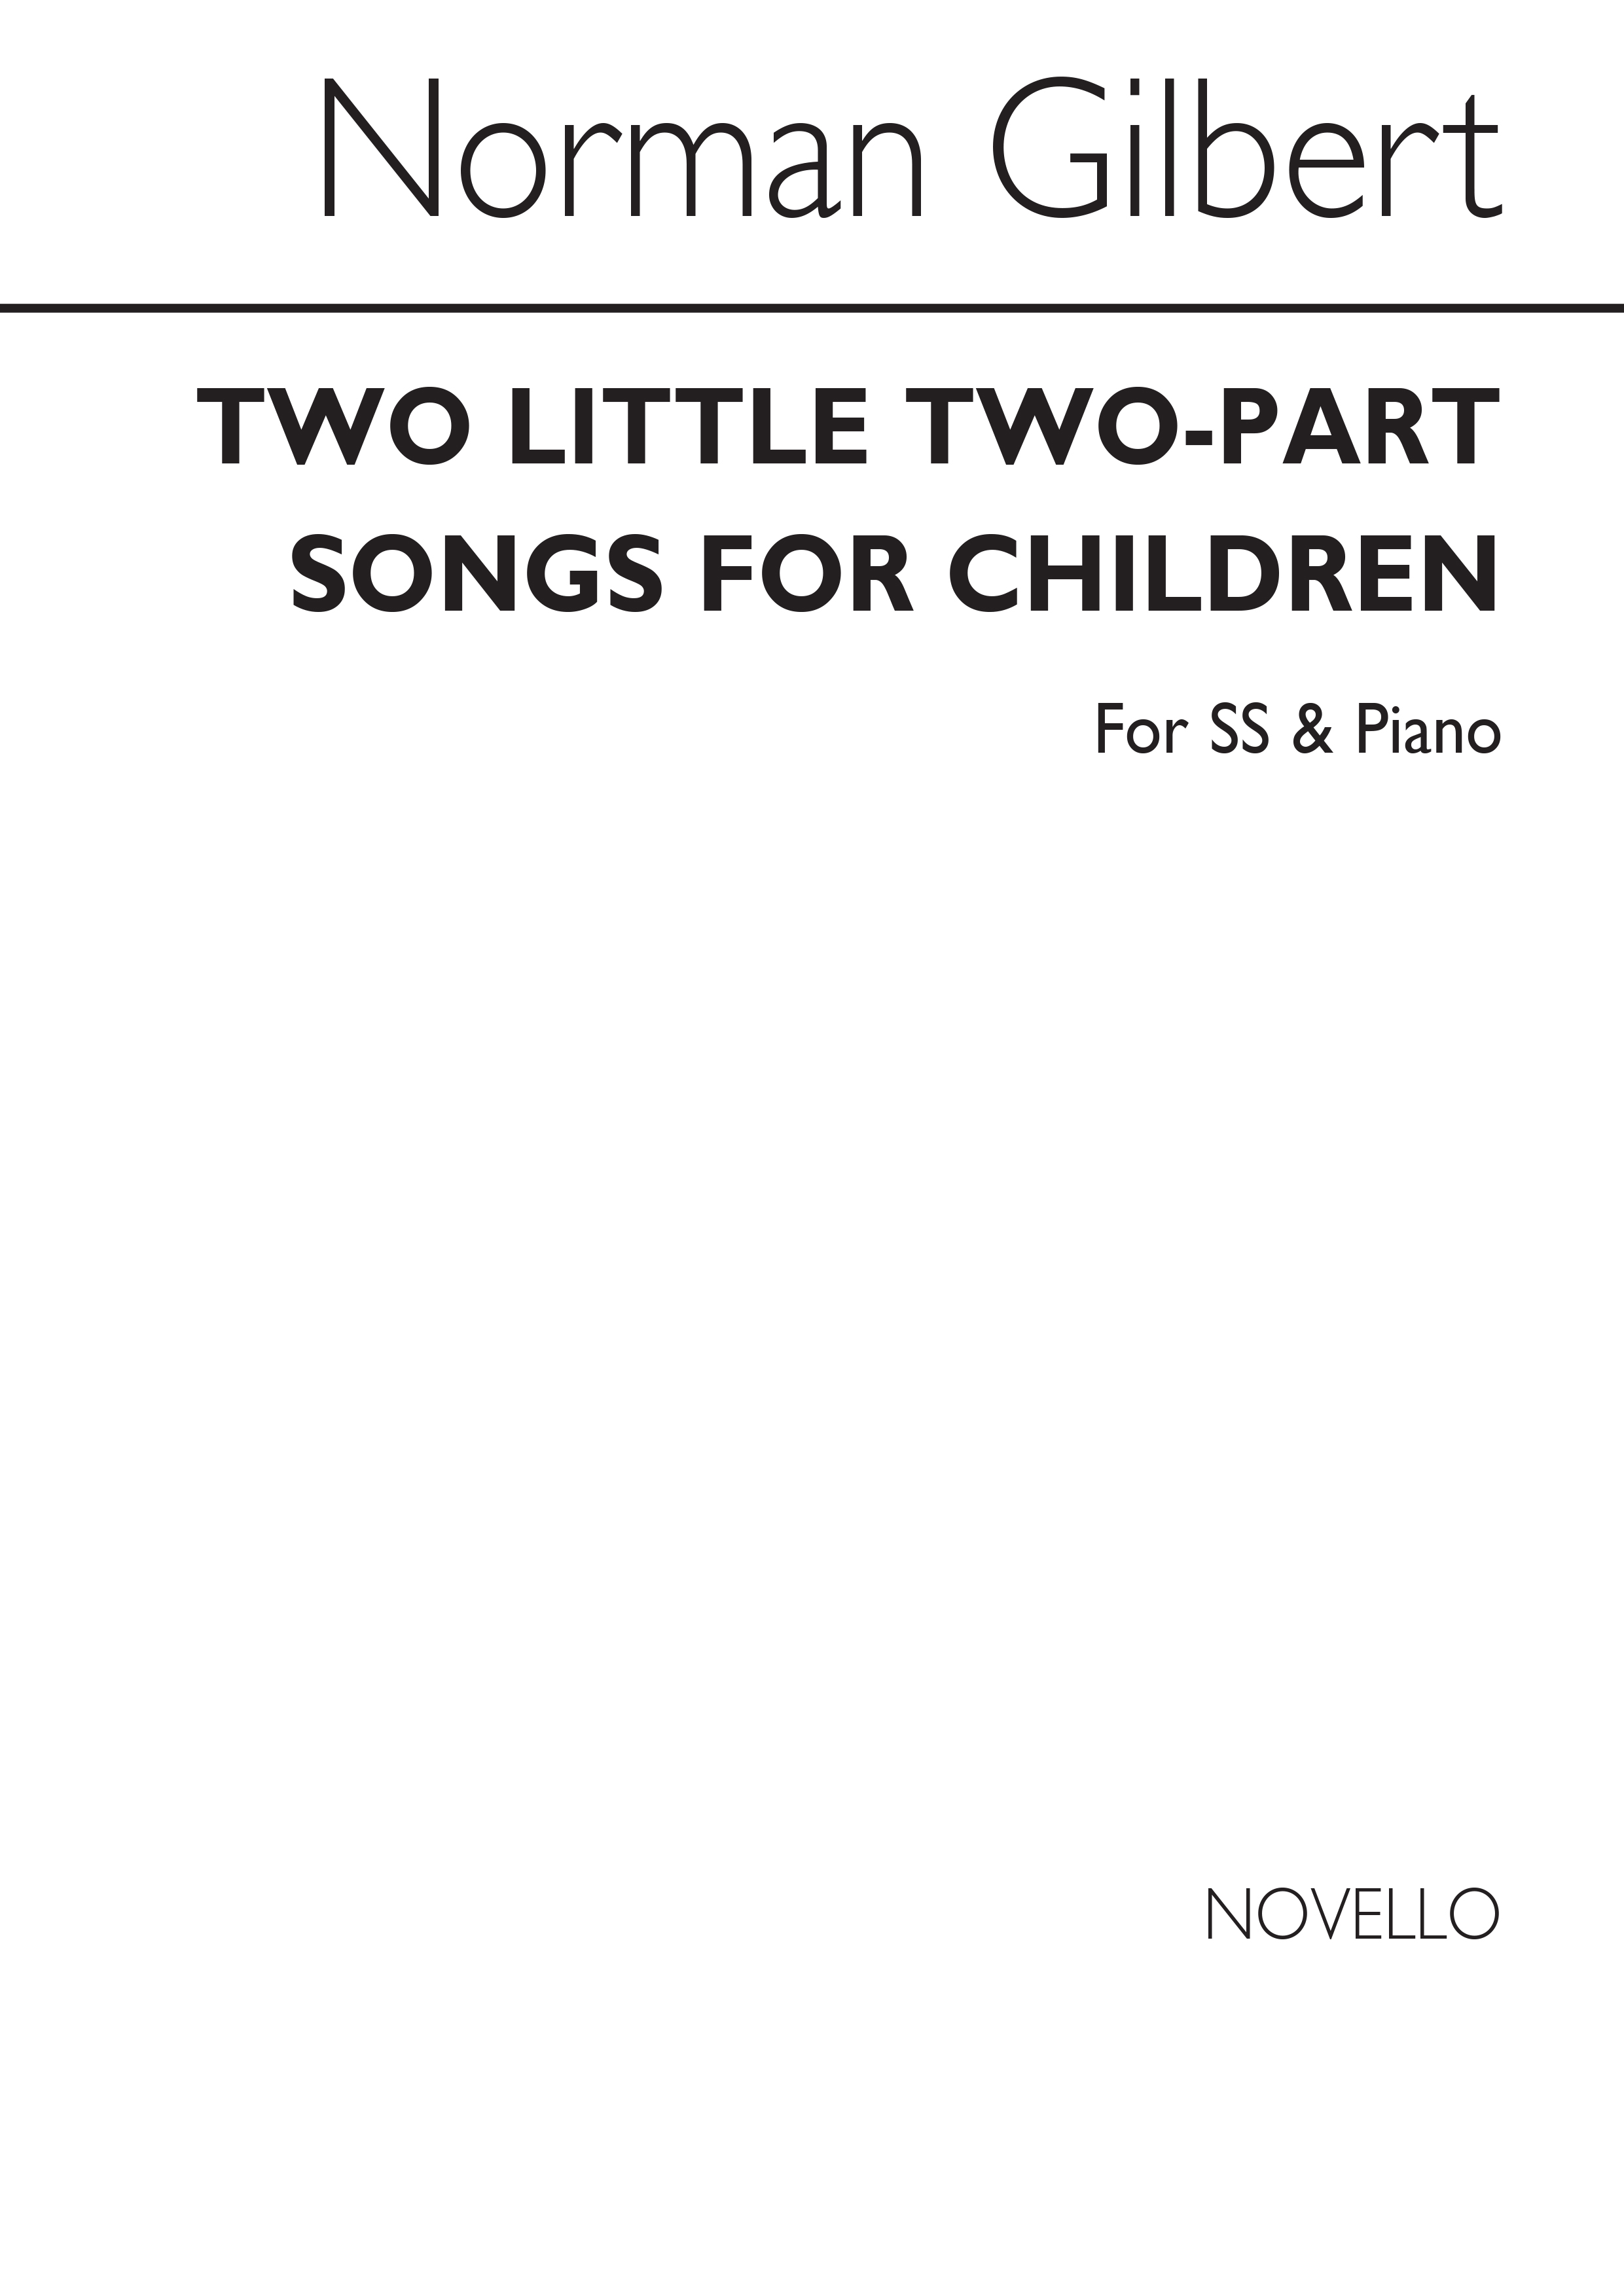 Norman Gilbert Two Little Two-part Songs For Children Ss/Pno